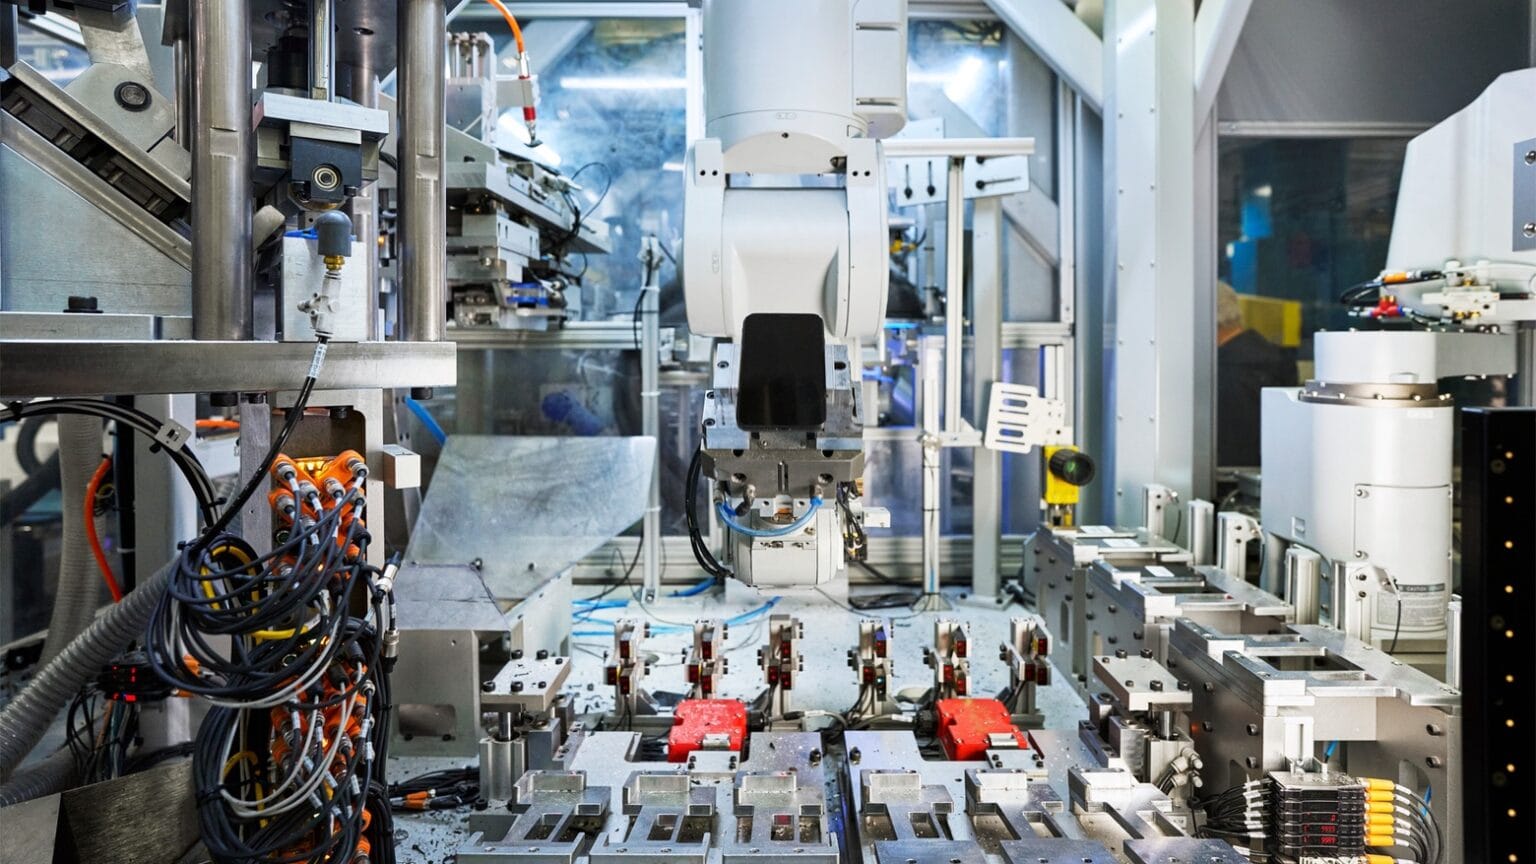 Daisy the robot can disassemble up to 1.2 million phones each year.